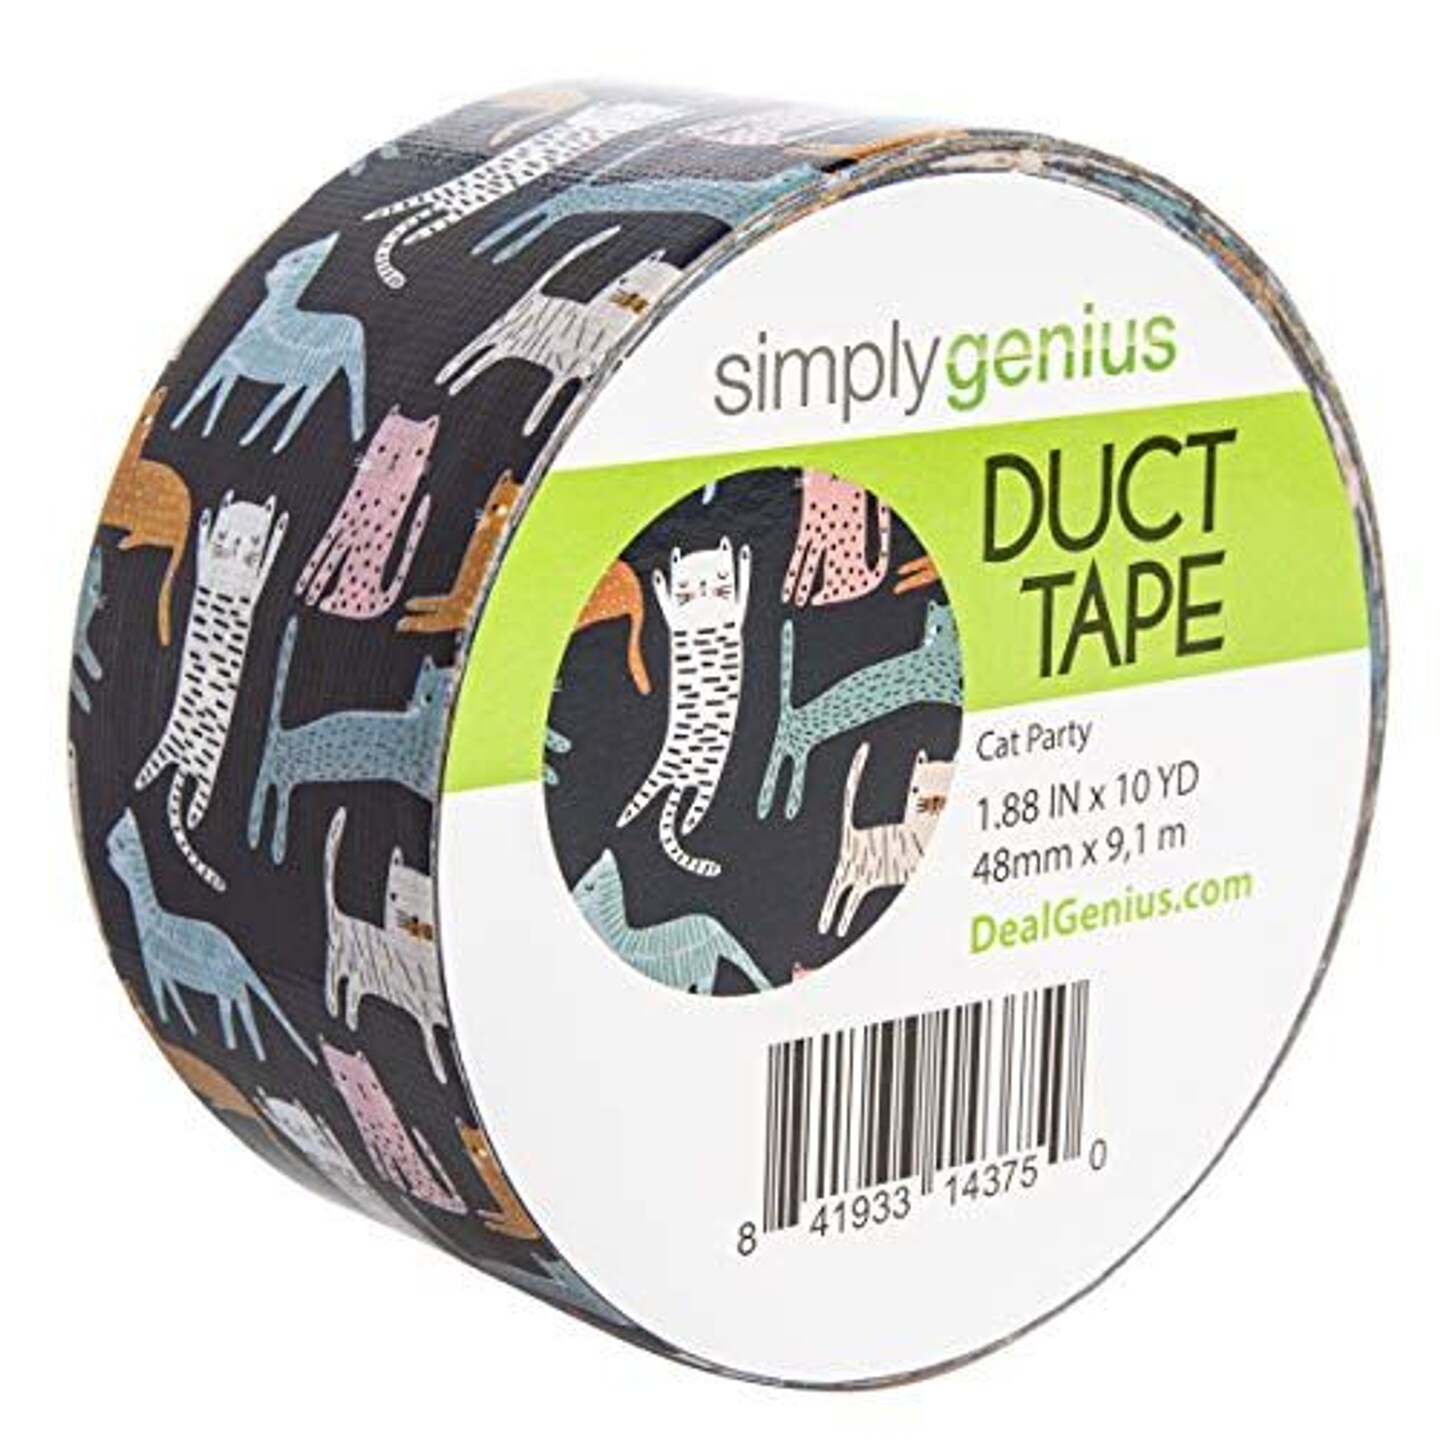 Simply Genius Pattern Duct Tape Heavy Duty - Craft Supplies for Kids &#x26; Adults - Colored Duct Tape - Single Roll 1.8 in x 10 yards - Colorful Tape for DIY, Craft &#x26; Home Improvement (Cat Party)